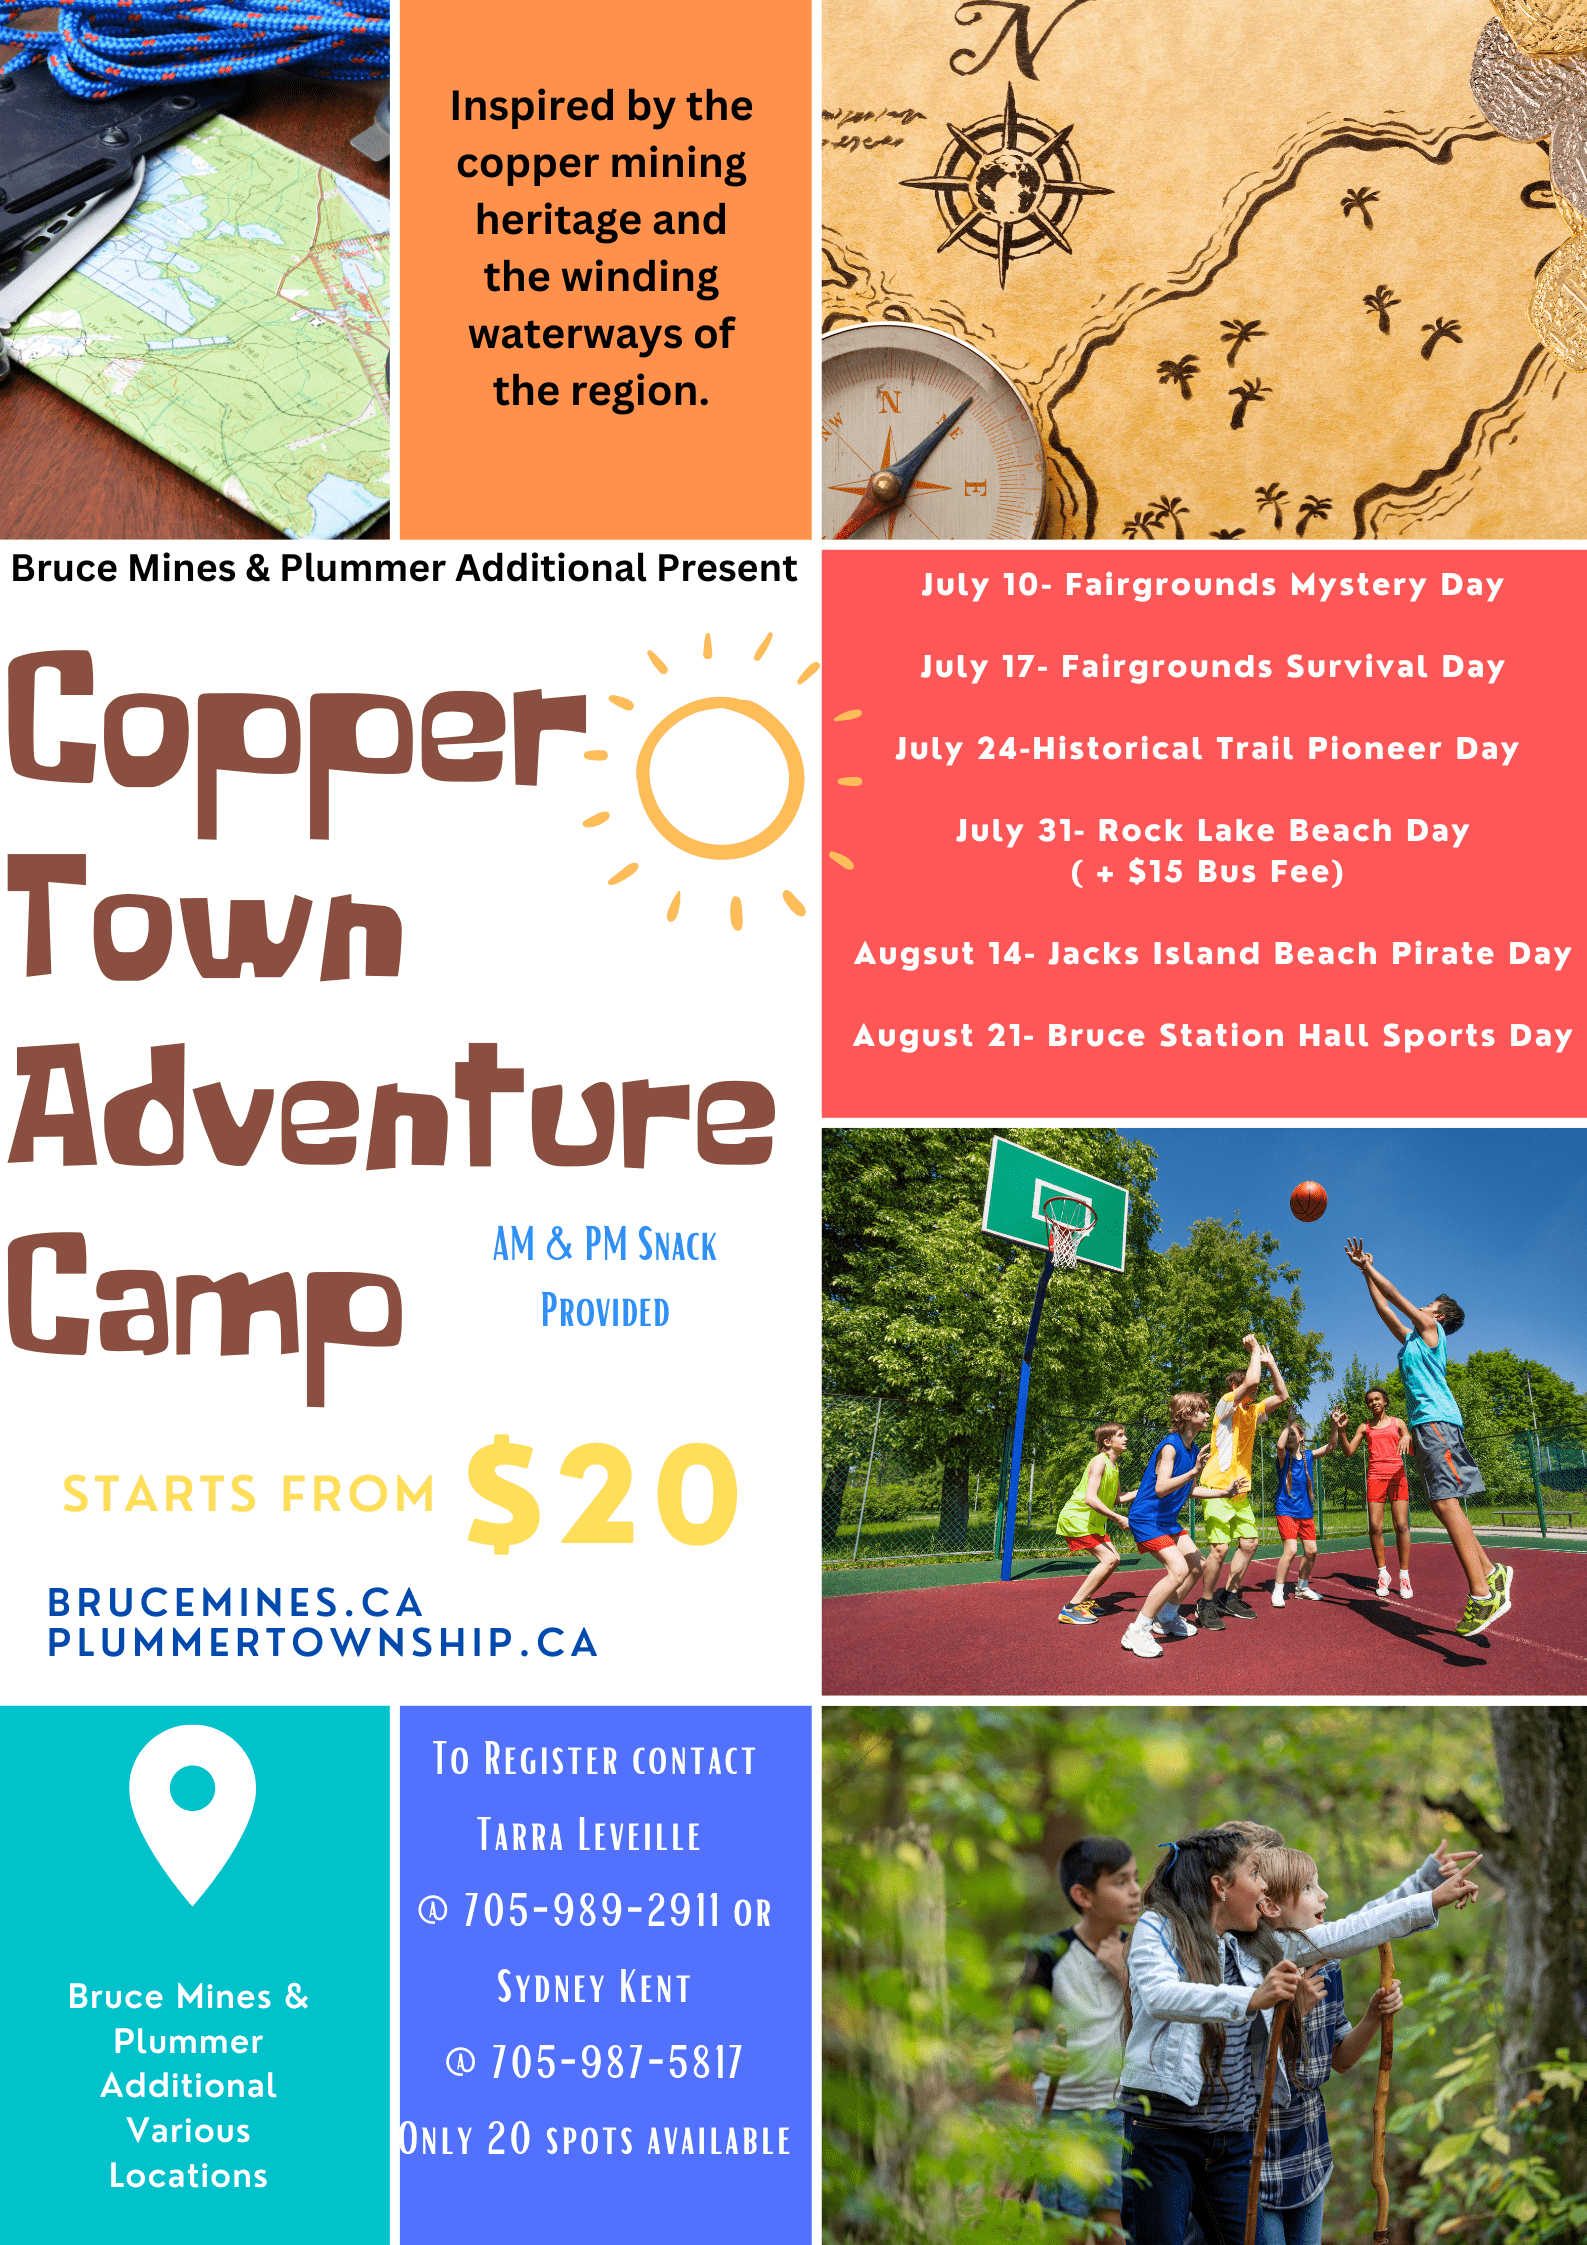 Copper Town Adventure Camp - August 21